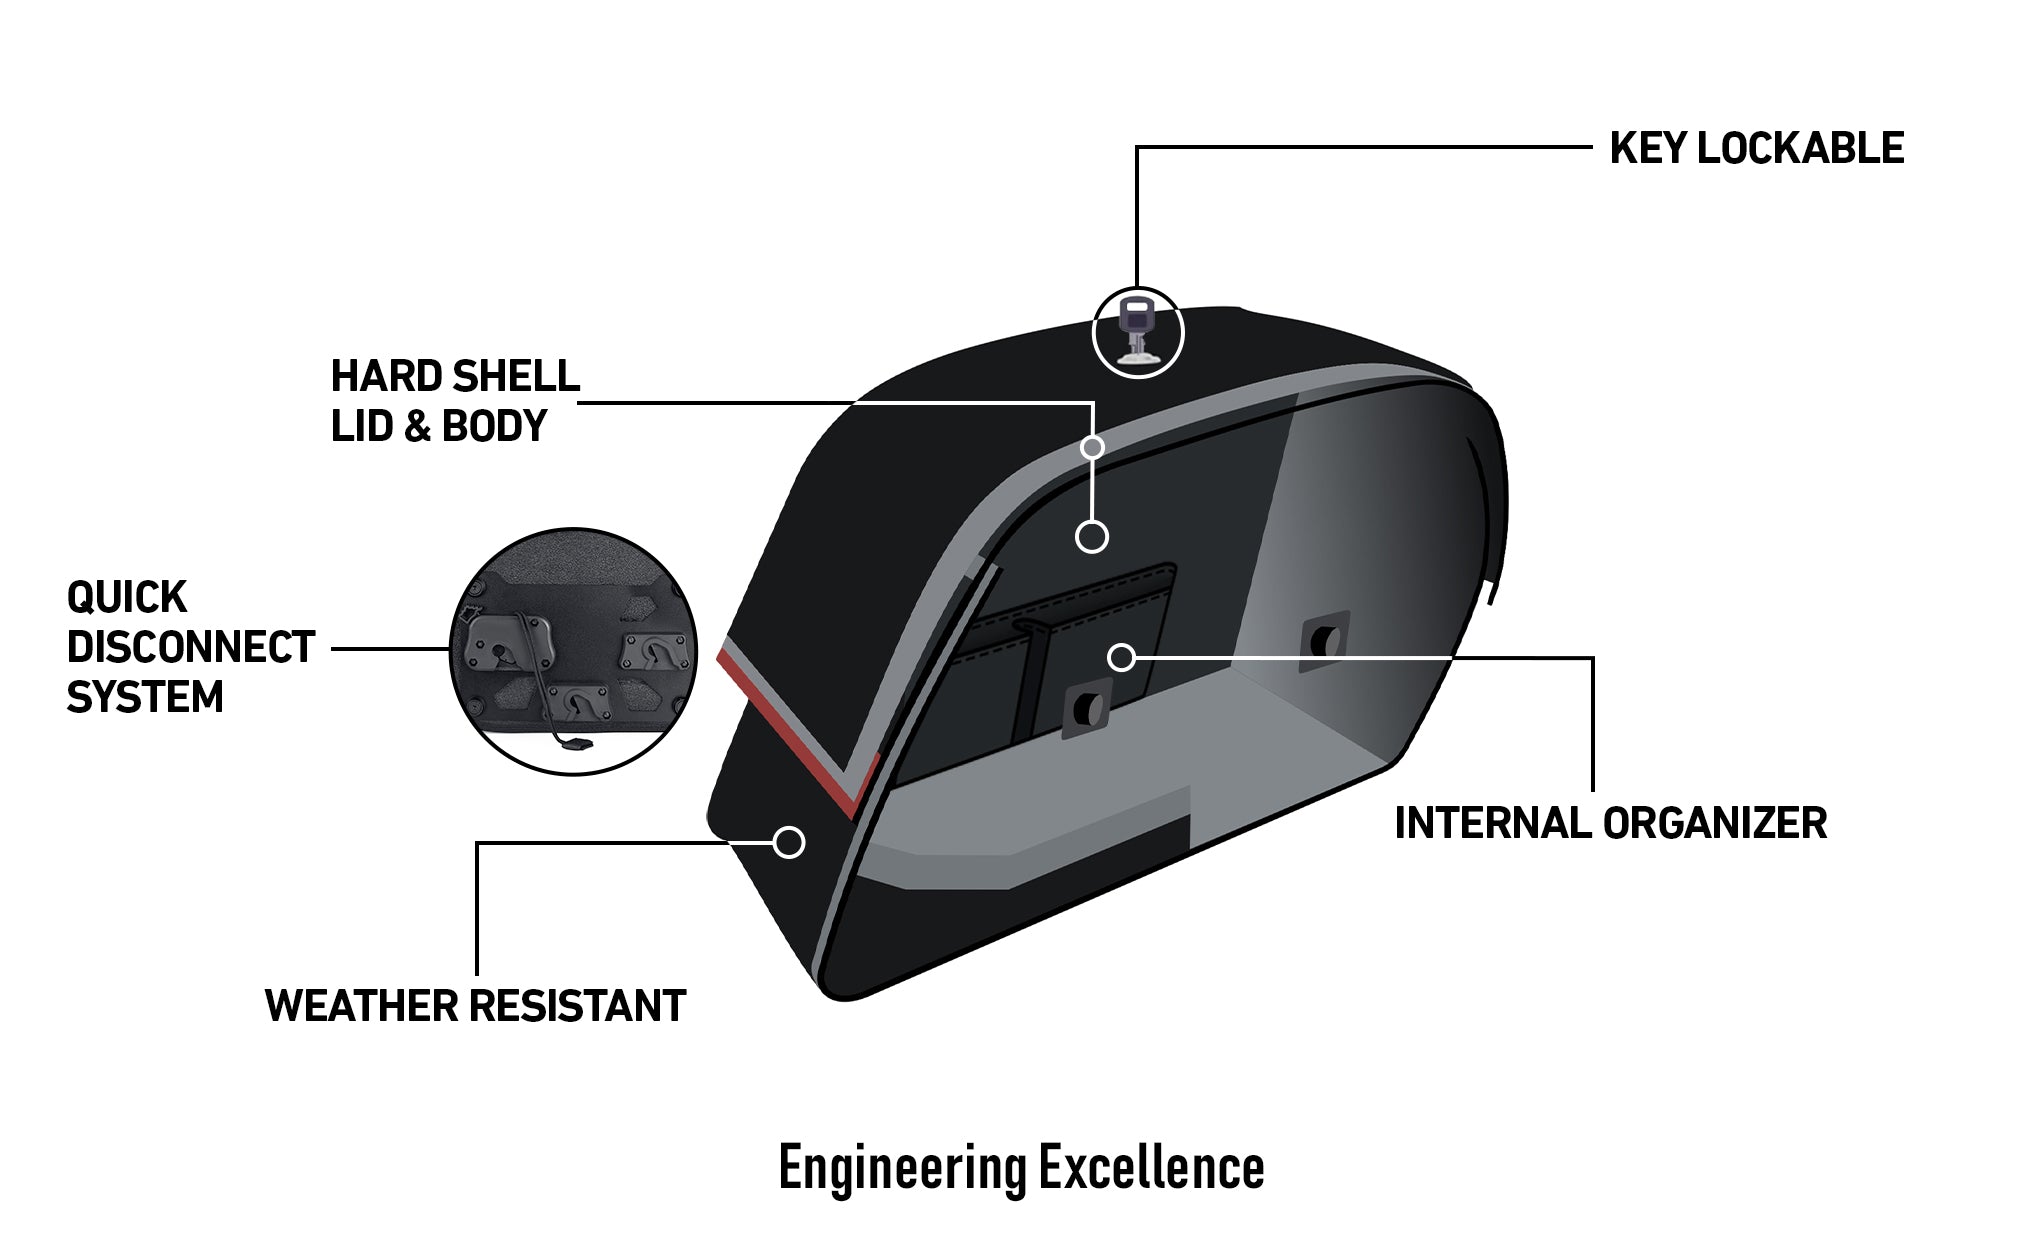 22L - Warrior Medium Quick-Mount Ducati Scrambler (2014-17) Motorcycle Saddlebags Engineering Excellence @expand